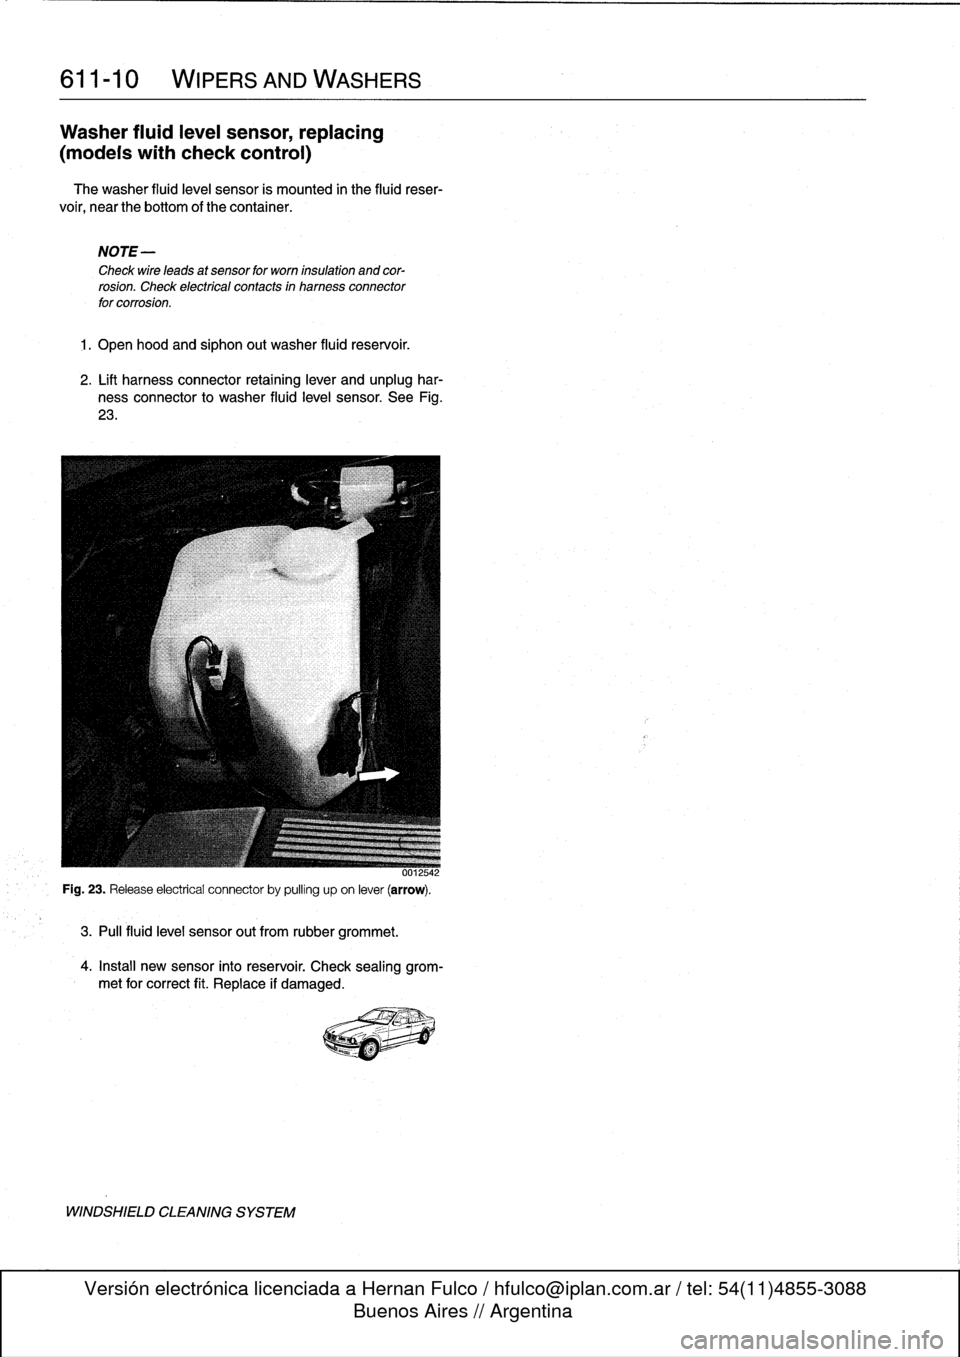 BMW 323i 1998 E36 Workshop Manual 
611-
1
0

	

WIPERS
AND
WASHERS

Washer
fluidleve¡
sensor,
replacing

(modeis
with
check
control)

The
washer
fluid
level
sensor
is
mounted
in
the
fluid
reser-

voir,
near
the
bottom
of
thecontainer